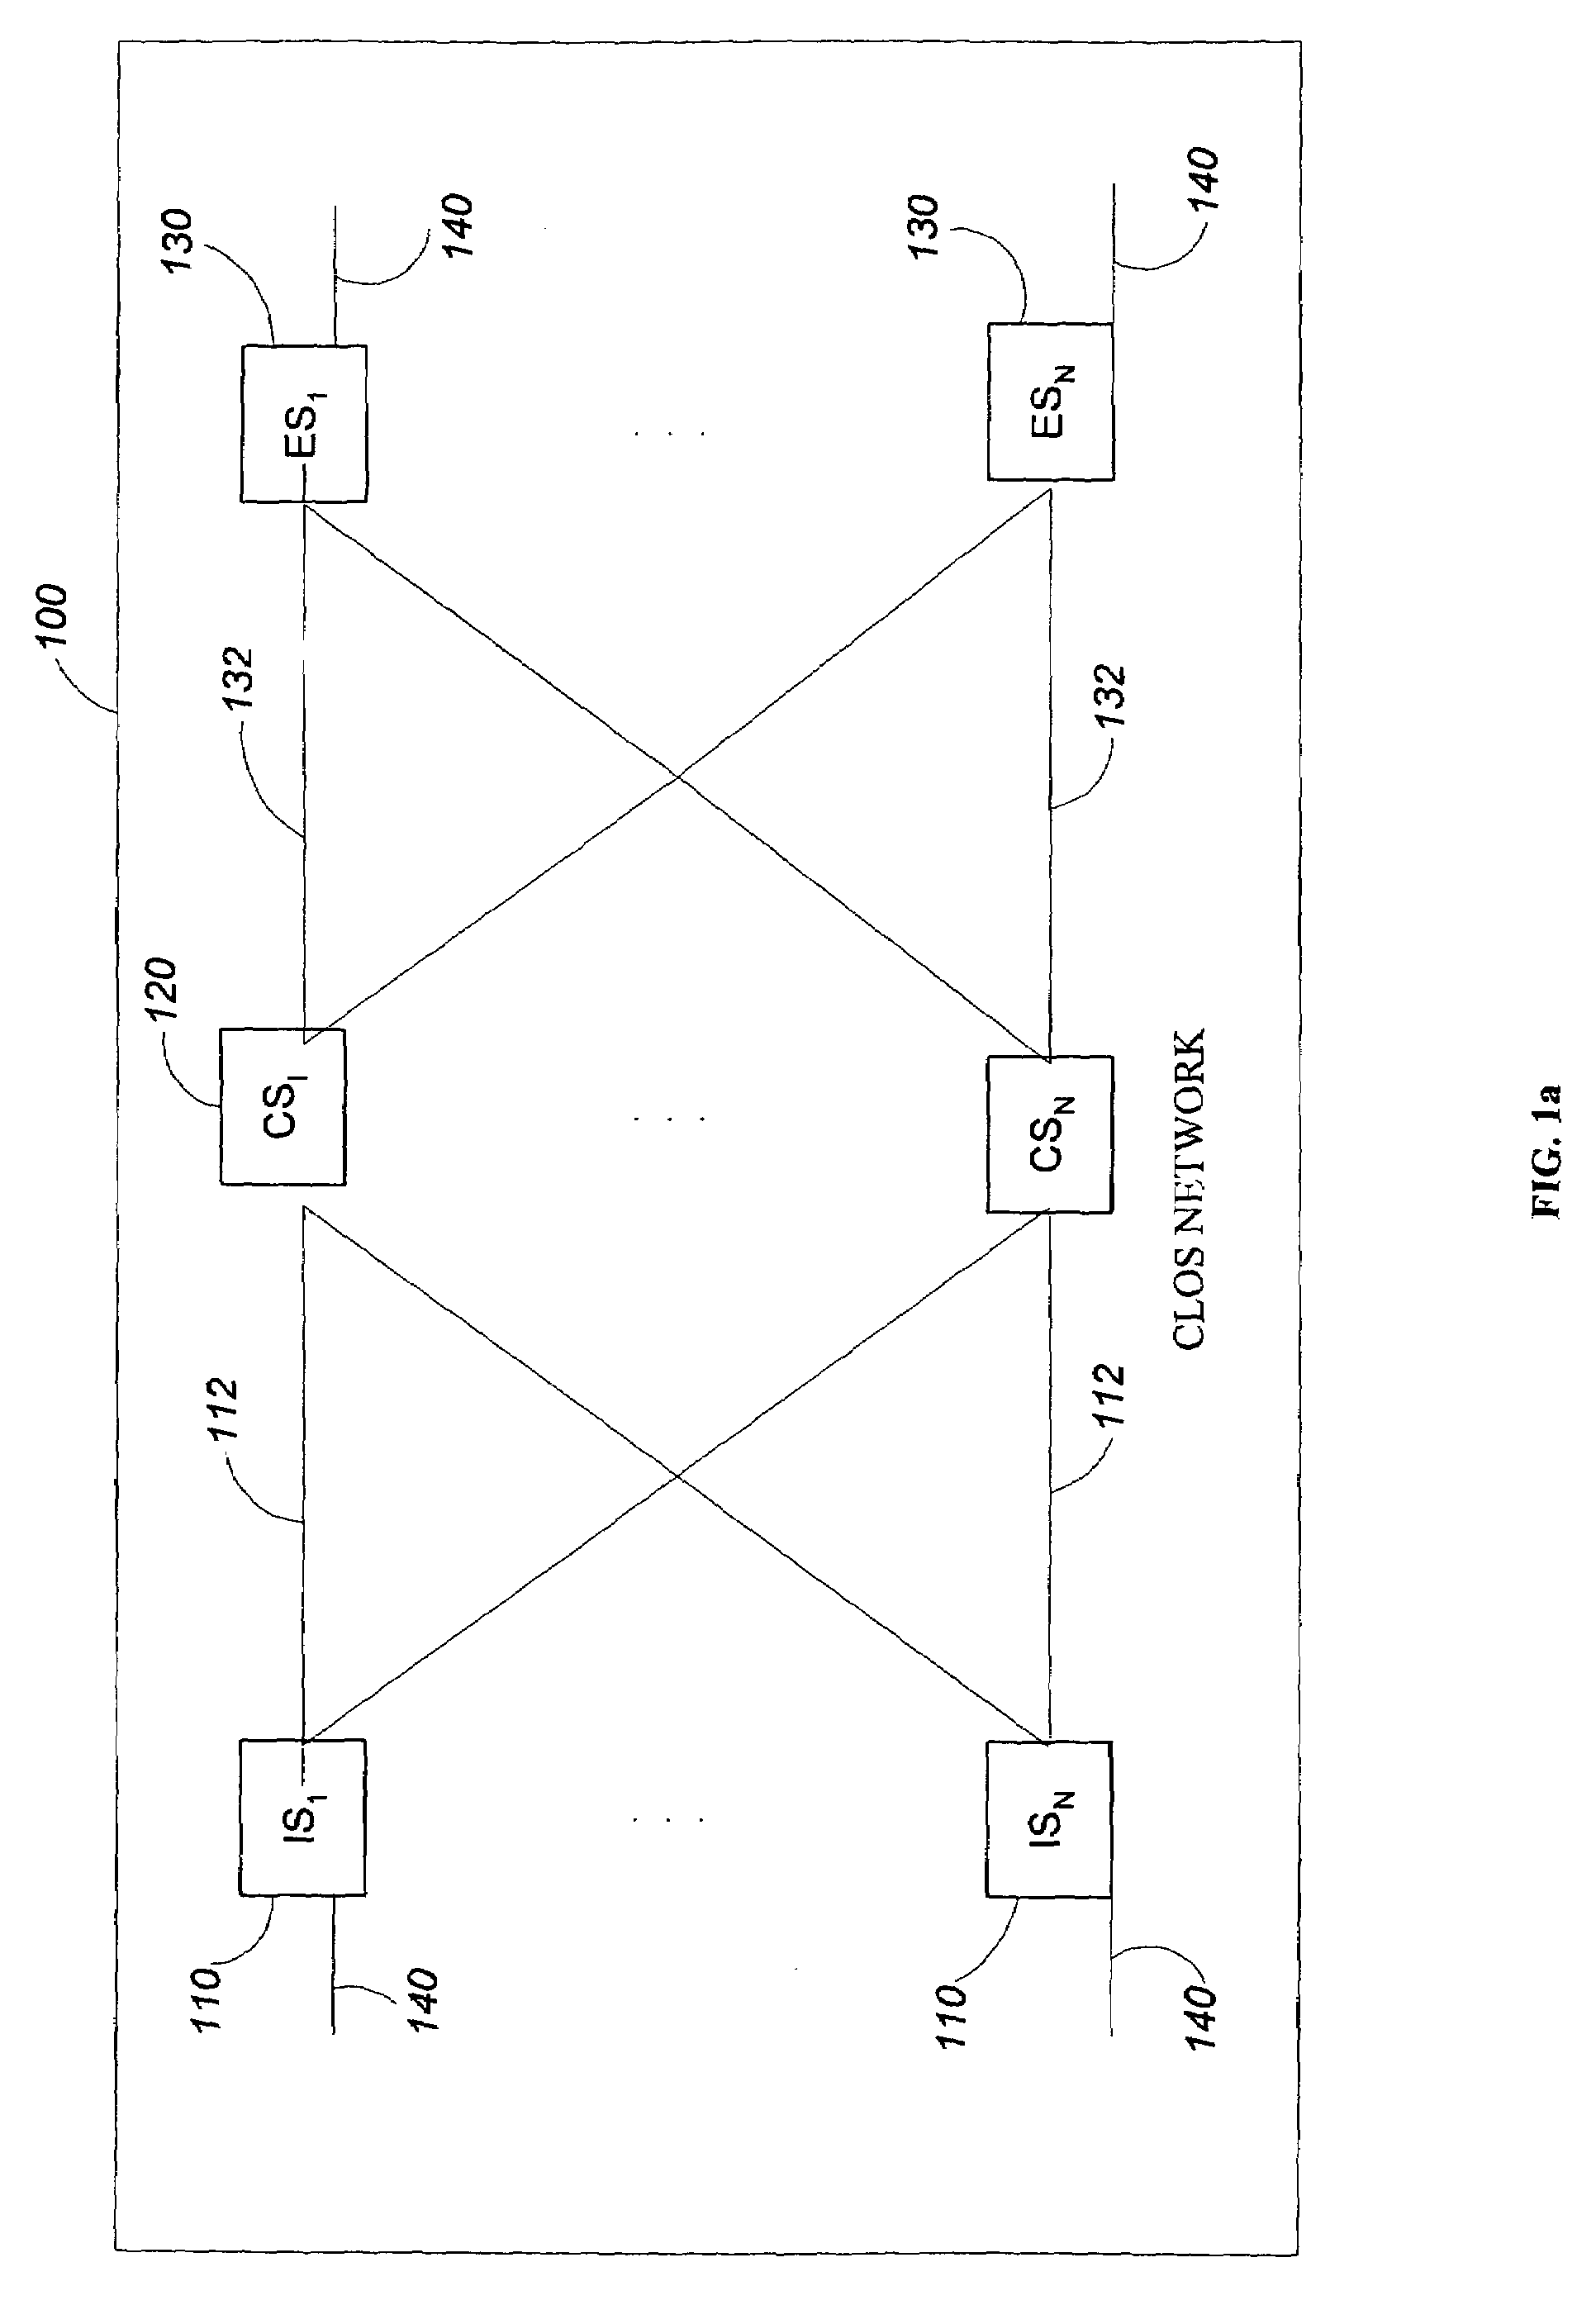 Switching control mechanism for supporting reconfiguaration without invoking a rearrangement algorithm